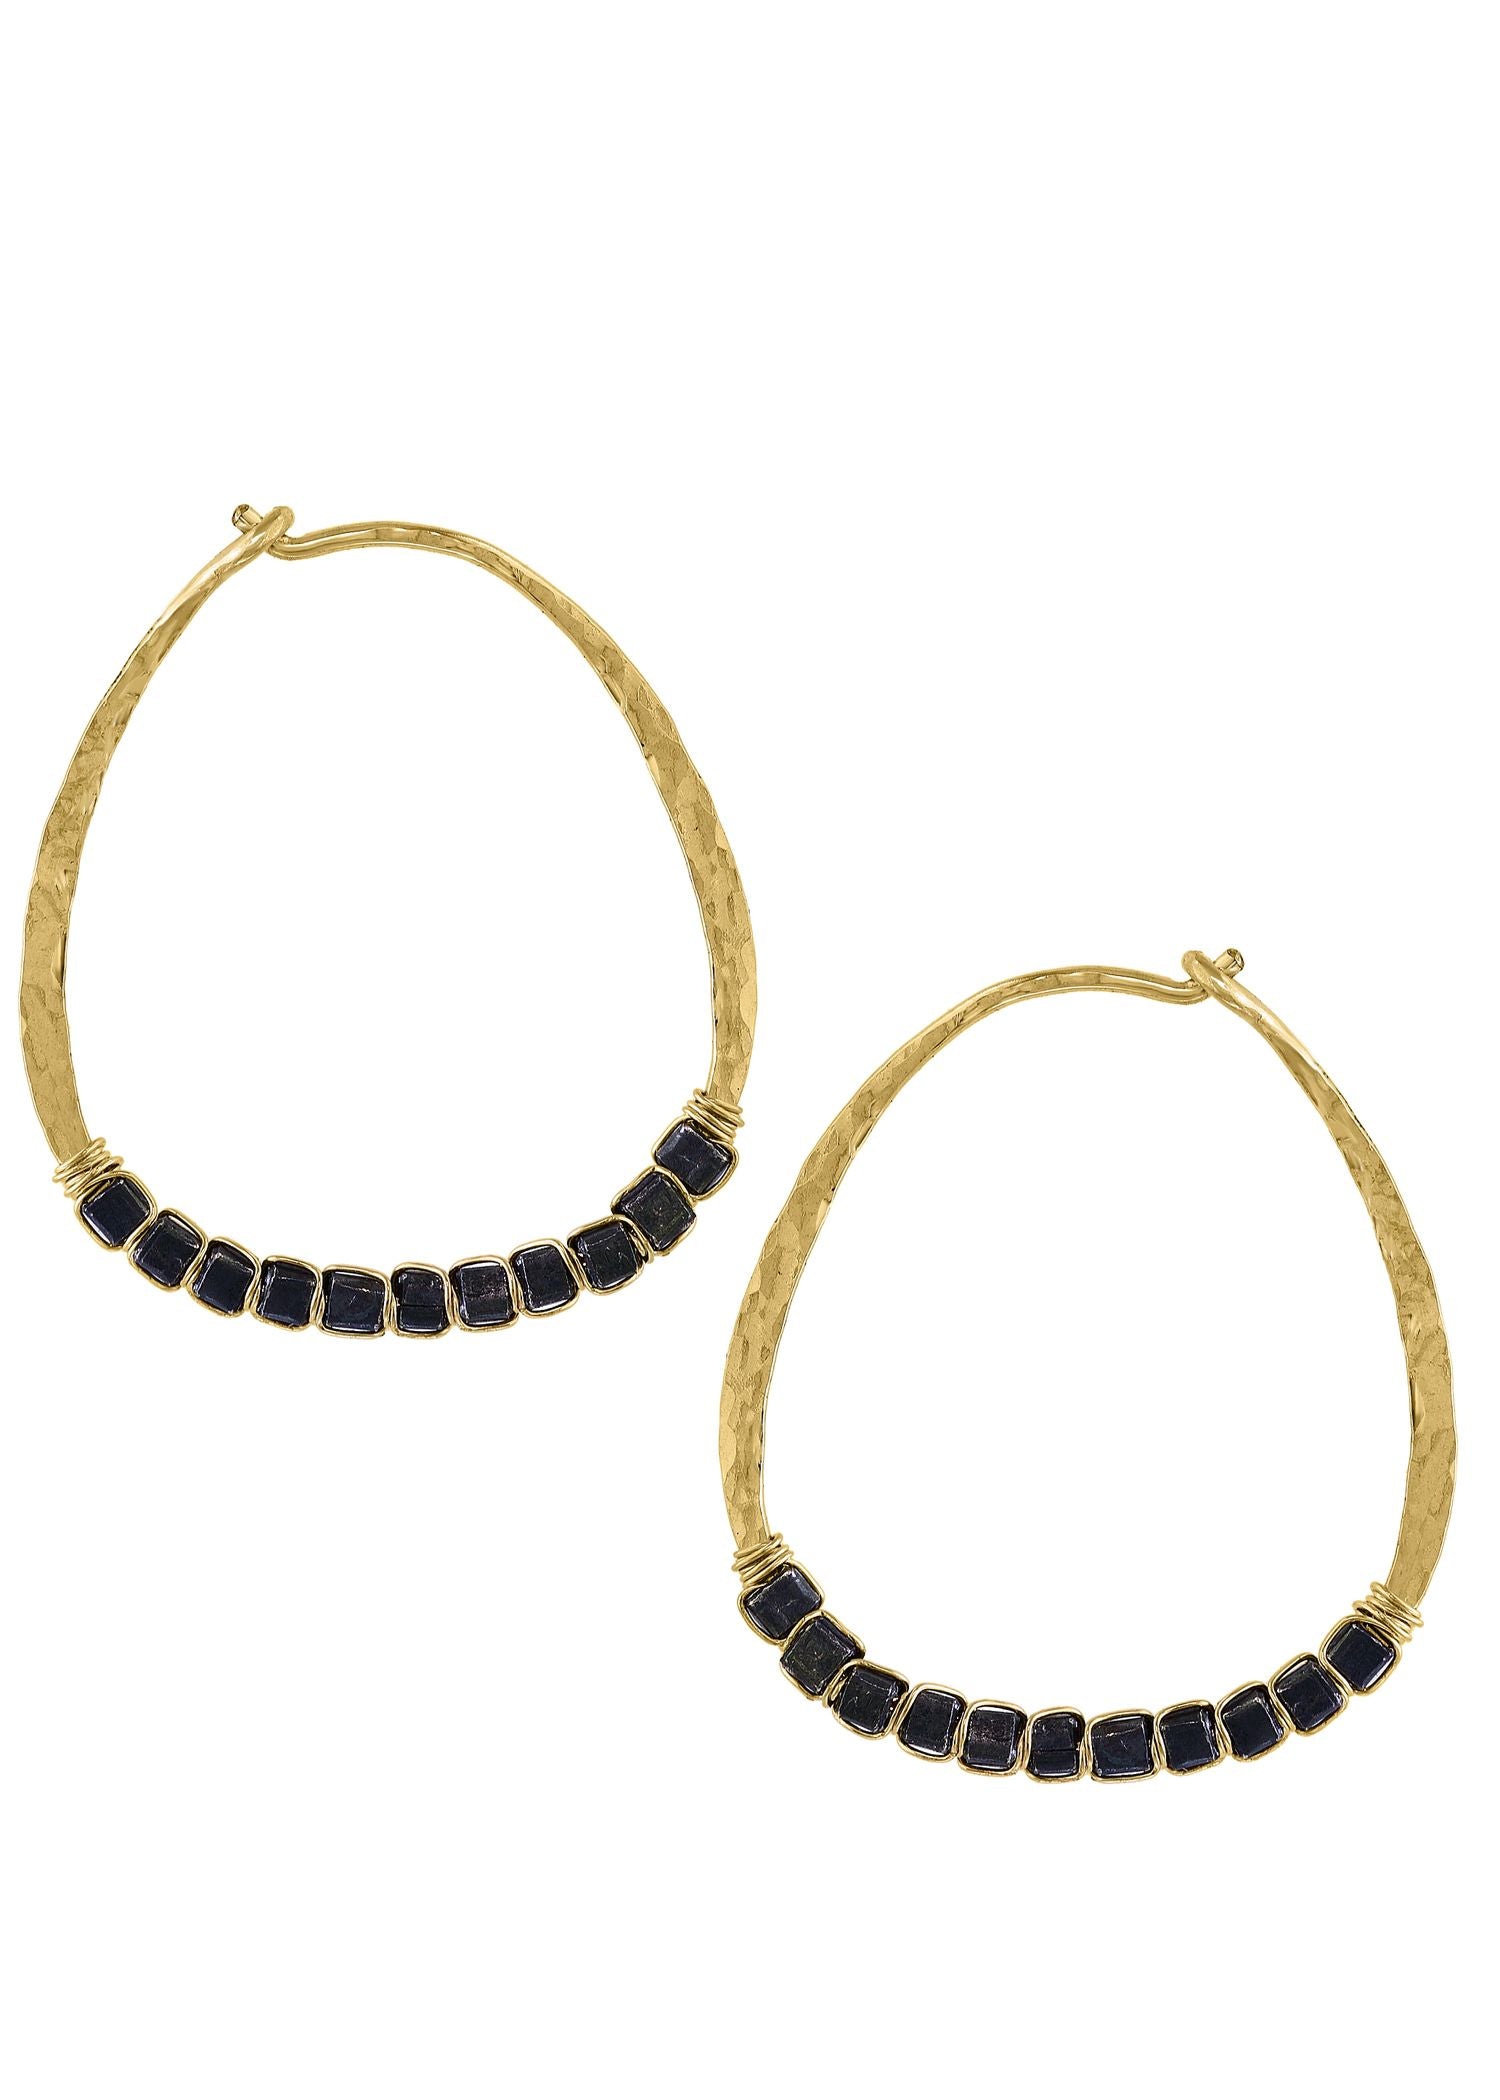 14k gold fill Blackened sterling silver Mixed metal Earrings measure 1" in length and 7/8" in width Handmade in our Los Angeles studio